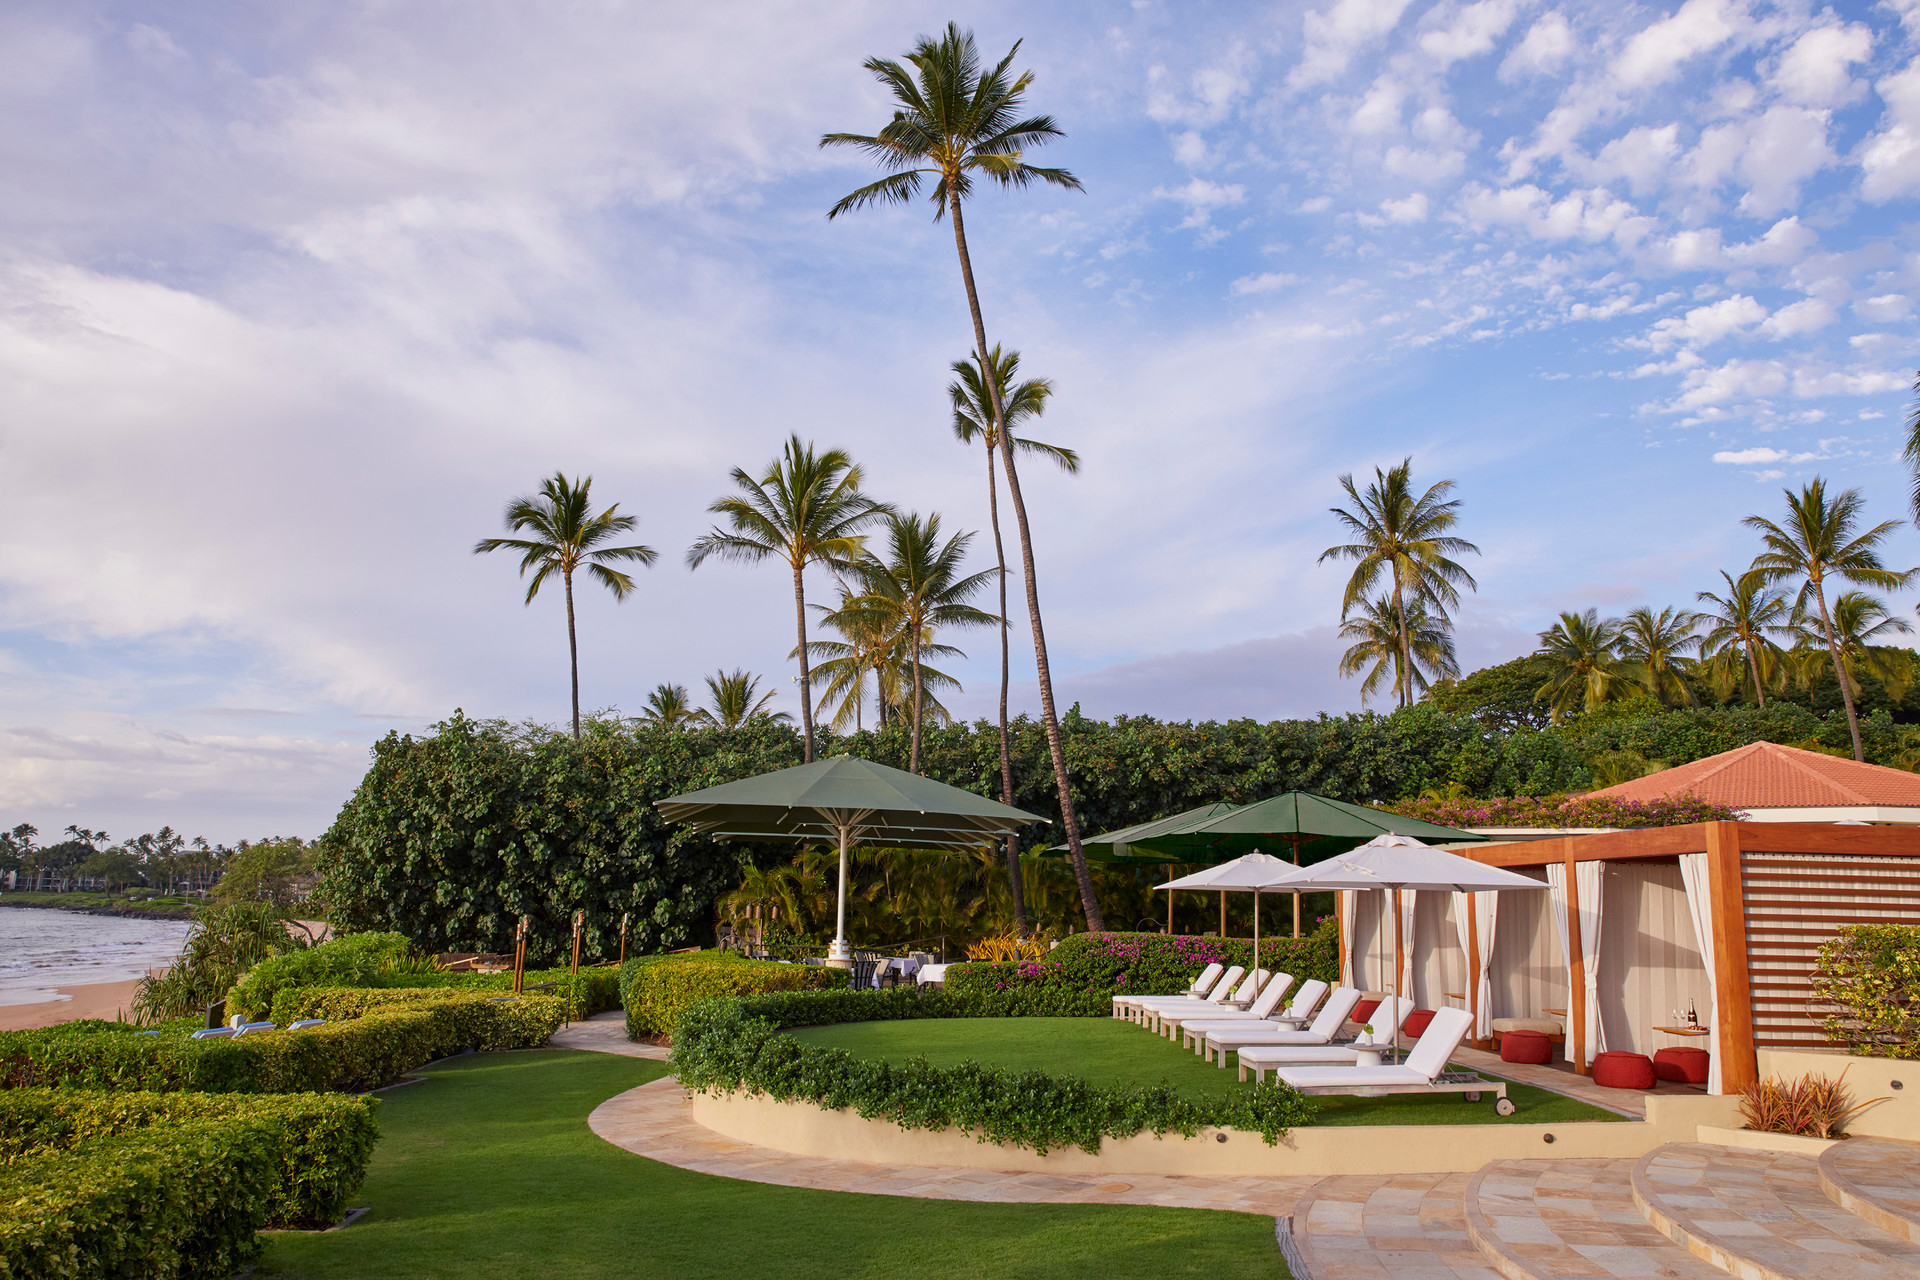 Ocean View Cabanas at the Four Seasons hotel in Maui, Hawaii